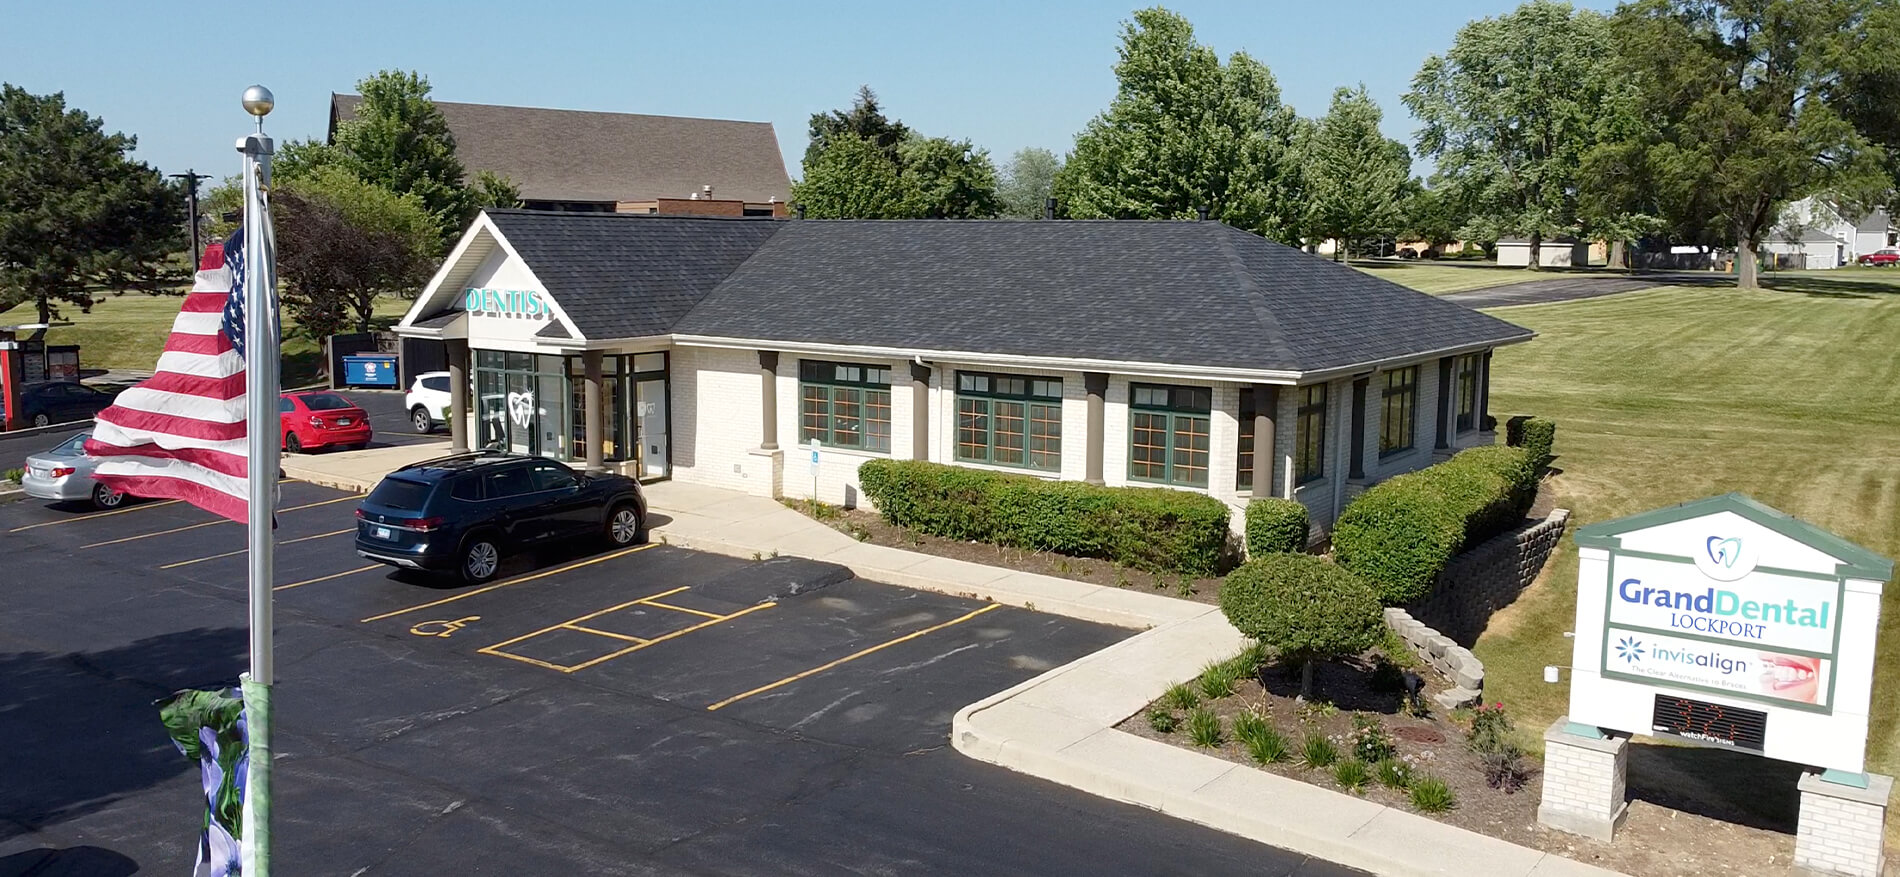 Outside view of Grand Dental Lockport office building